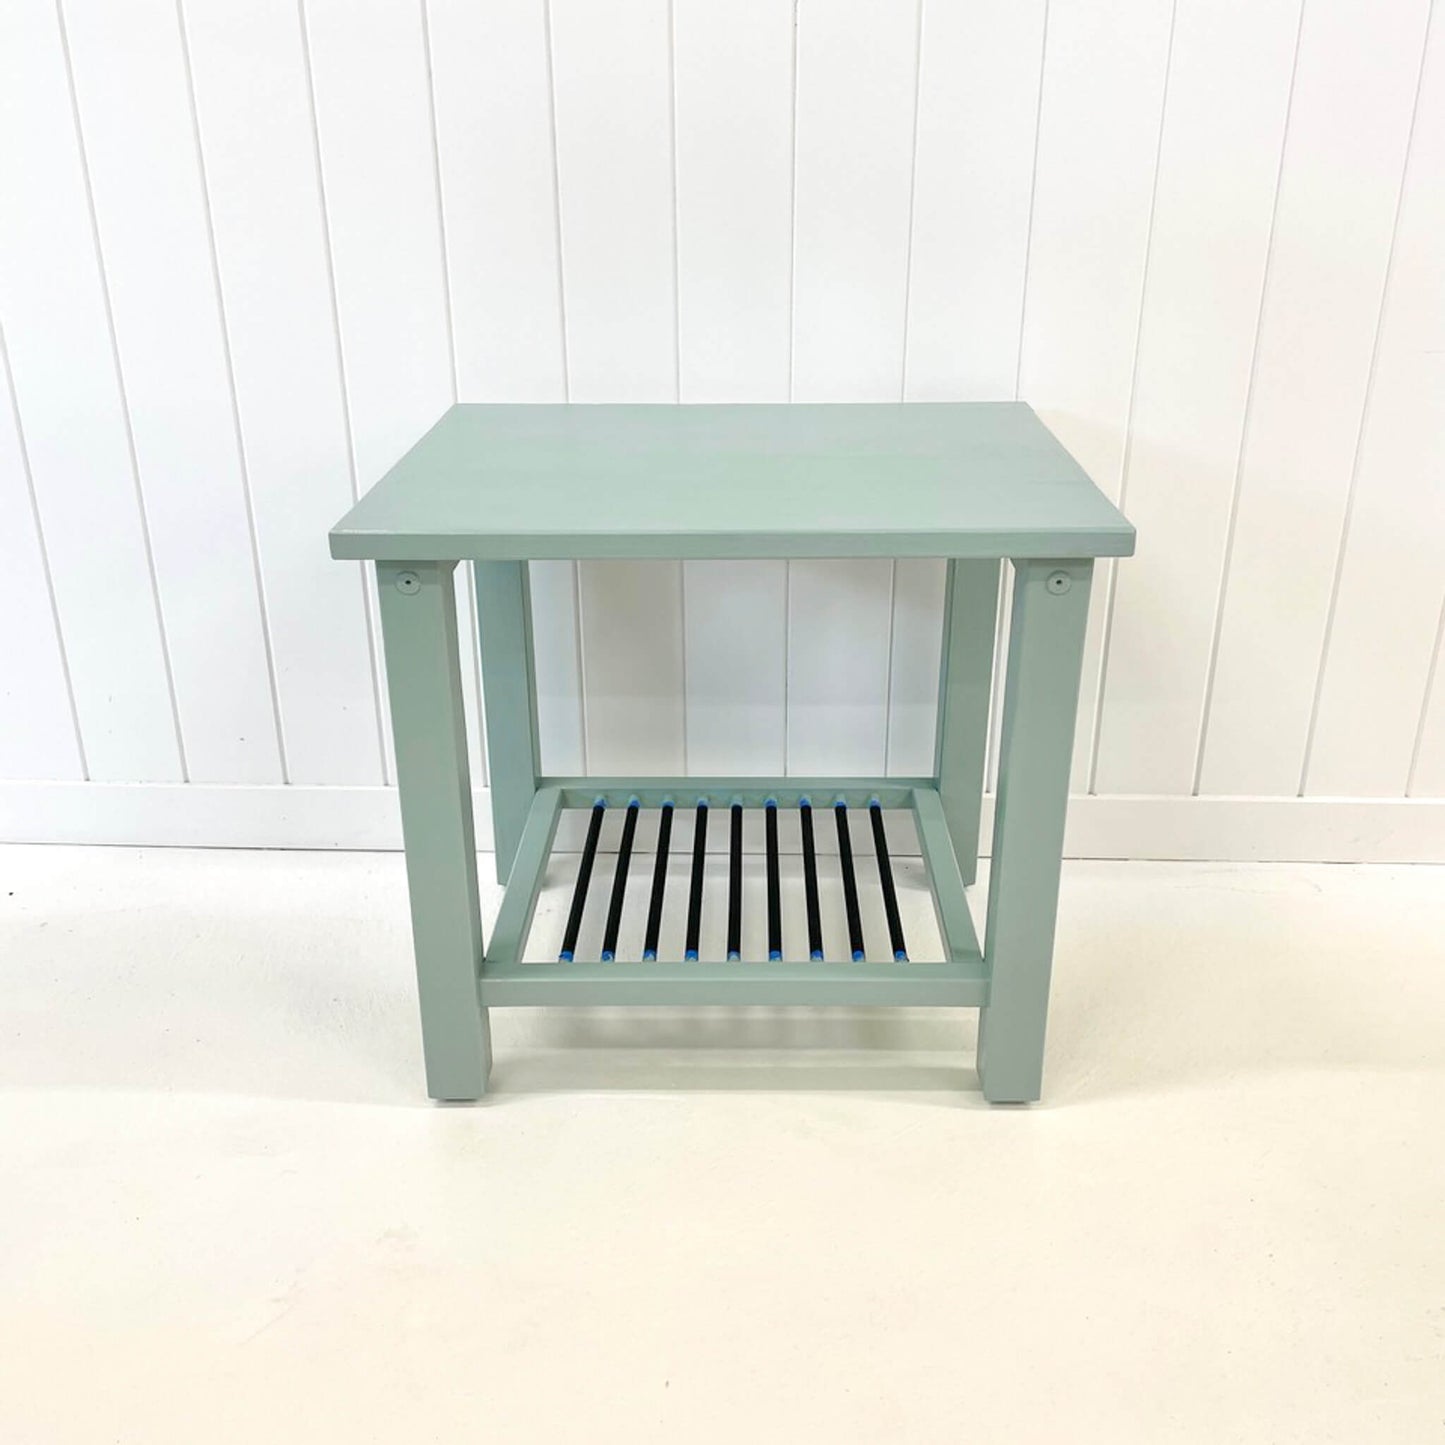 Small timber table painted with Blake & Taylor Kettle GreenChalk Furniture Paint